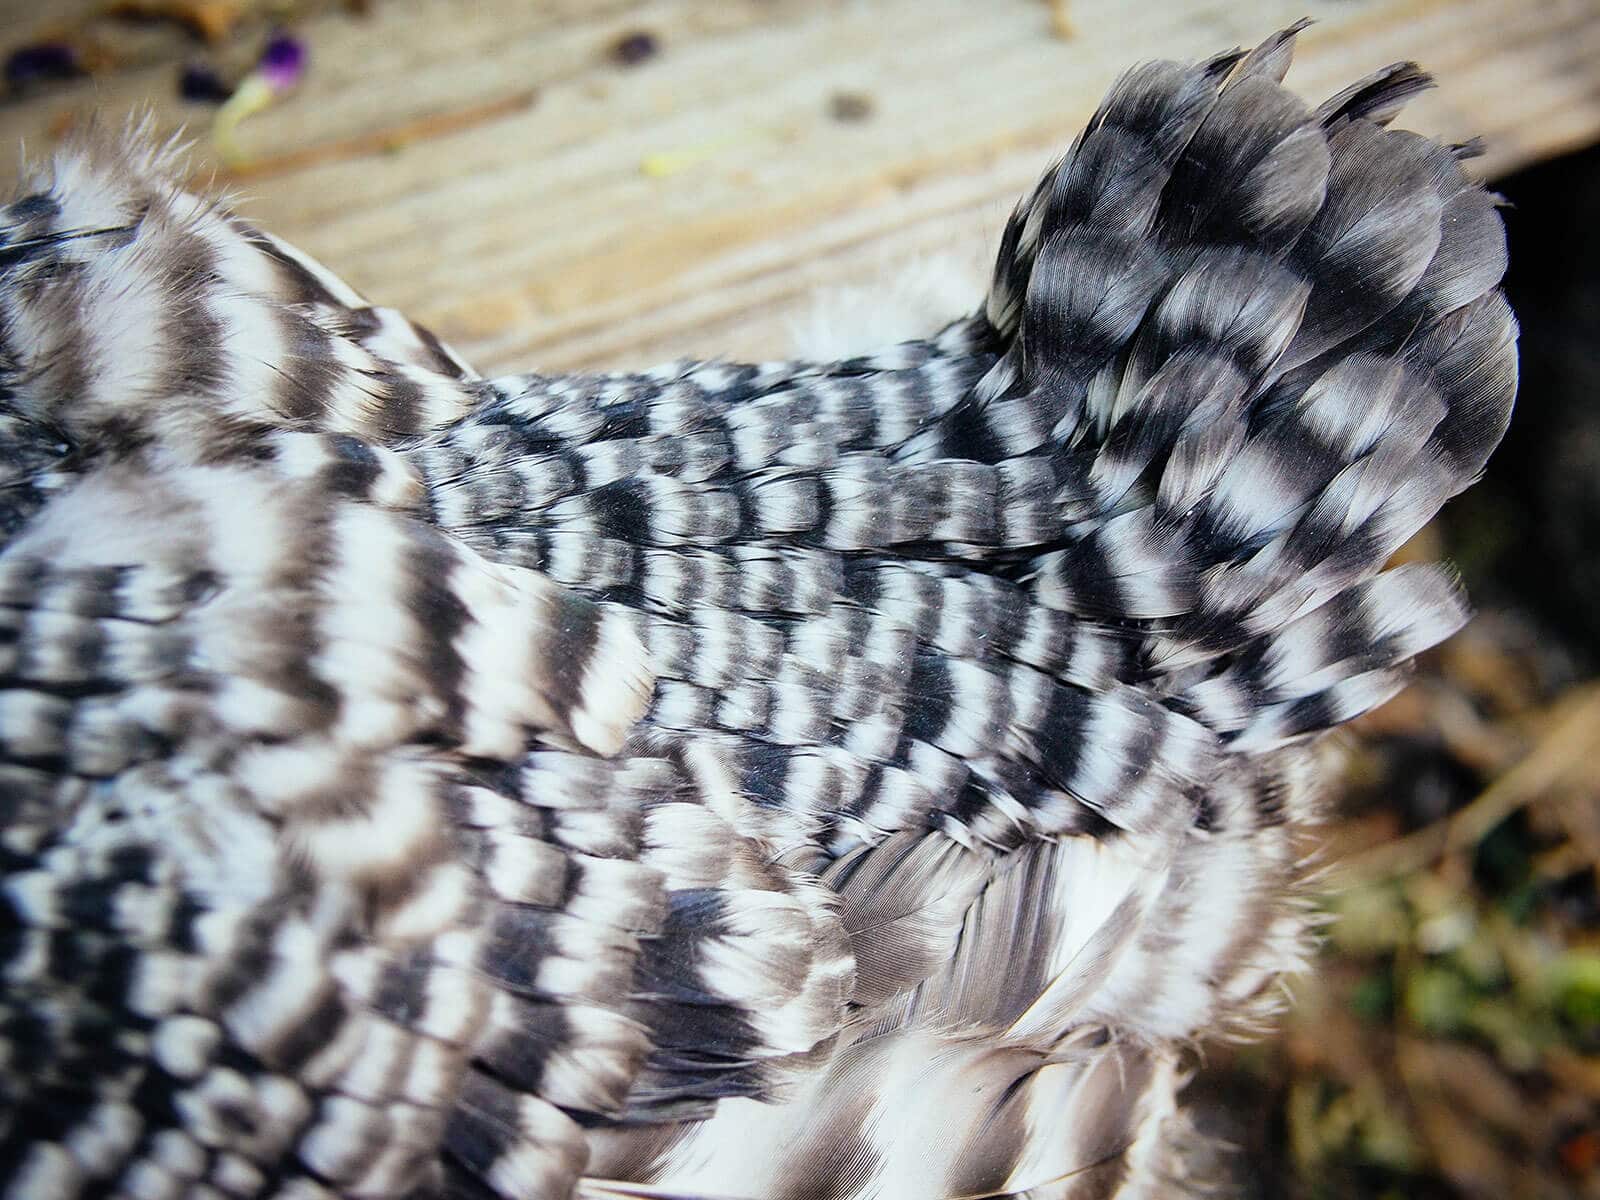 Newly emerged feathers on Barred Rock chicken's tail at the completion of a molt